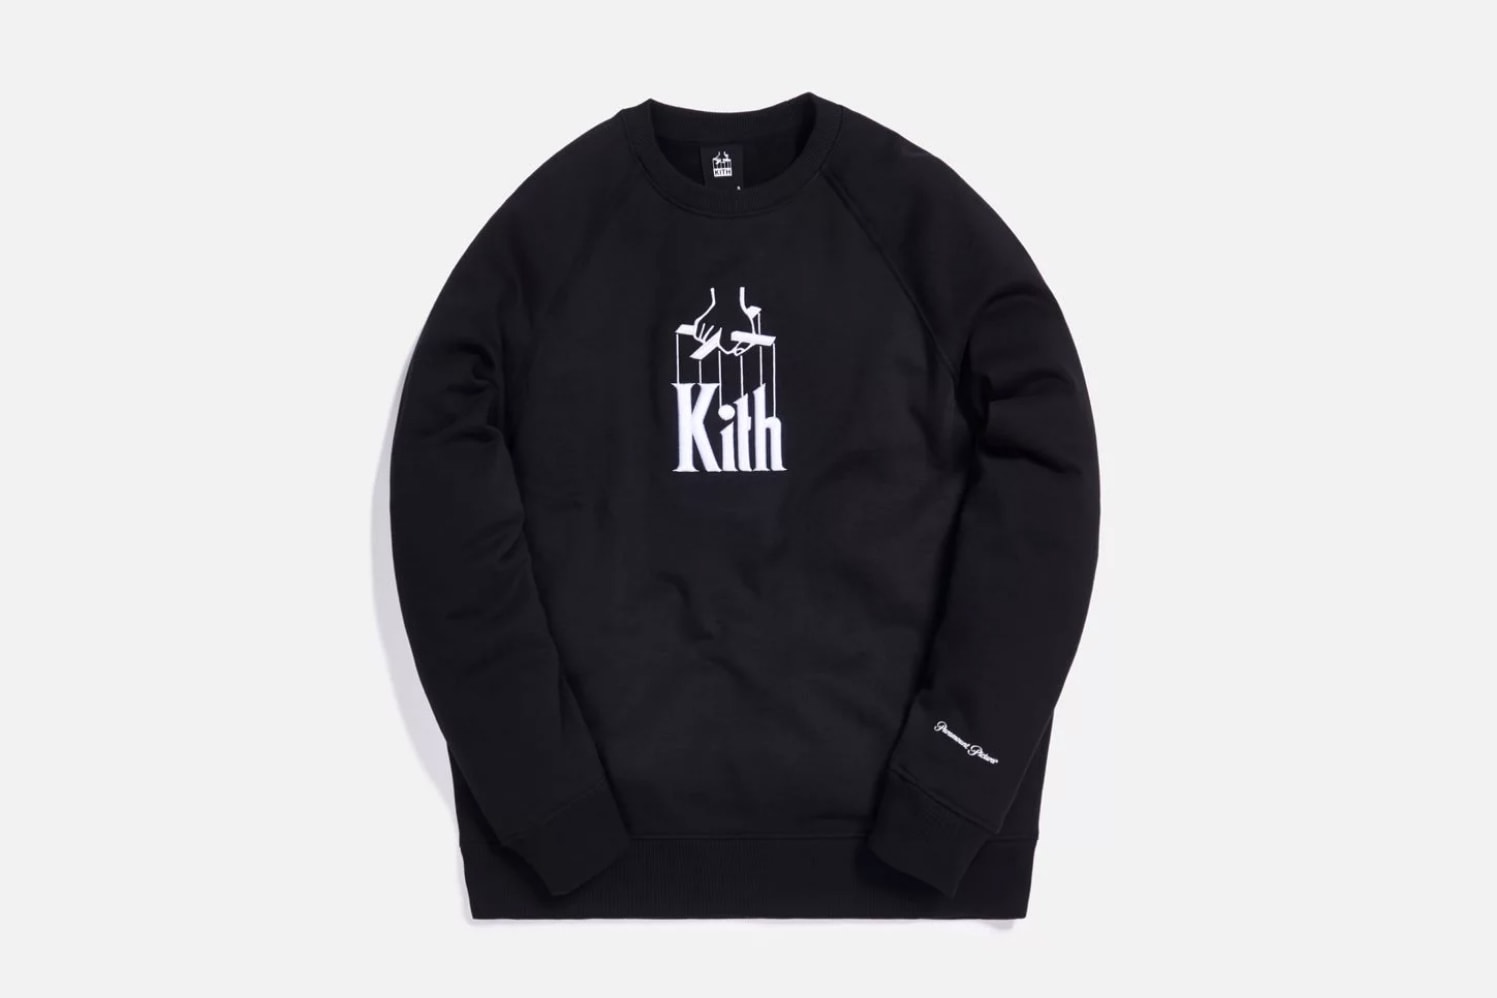 'The Godfather' x KITH Collaborative Capsule collaborations KITH MONDAY PROGRAM ronnie fieg